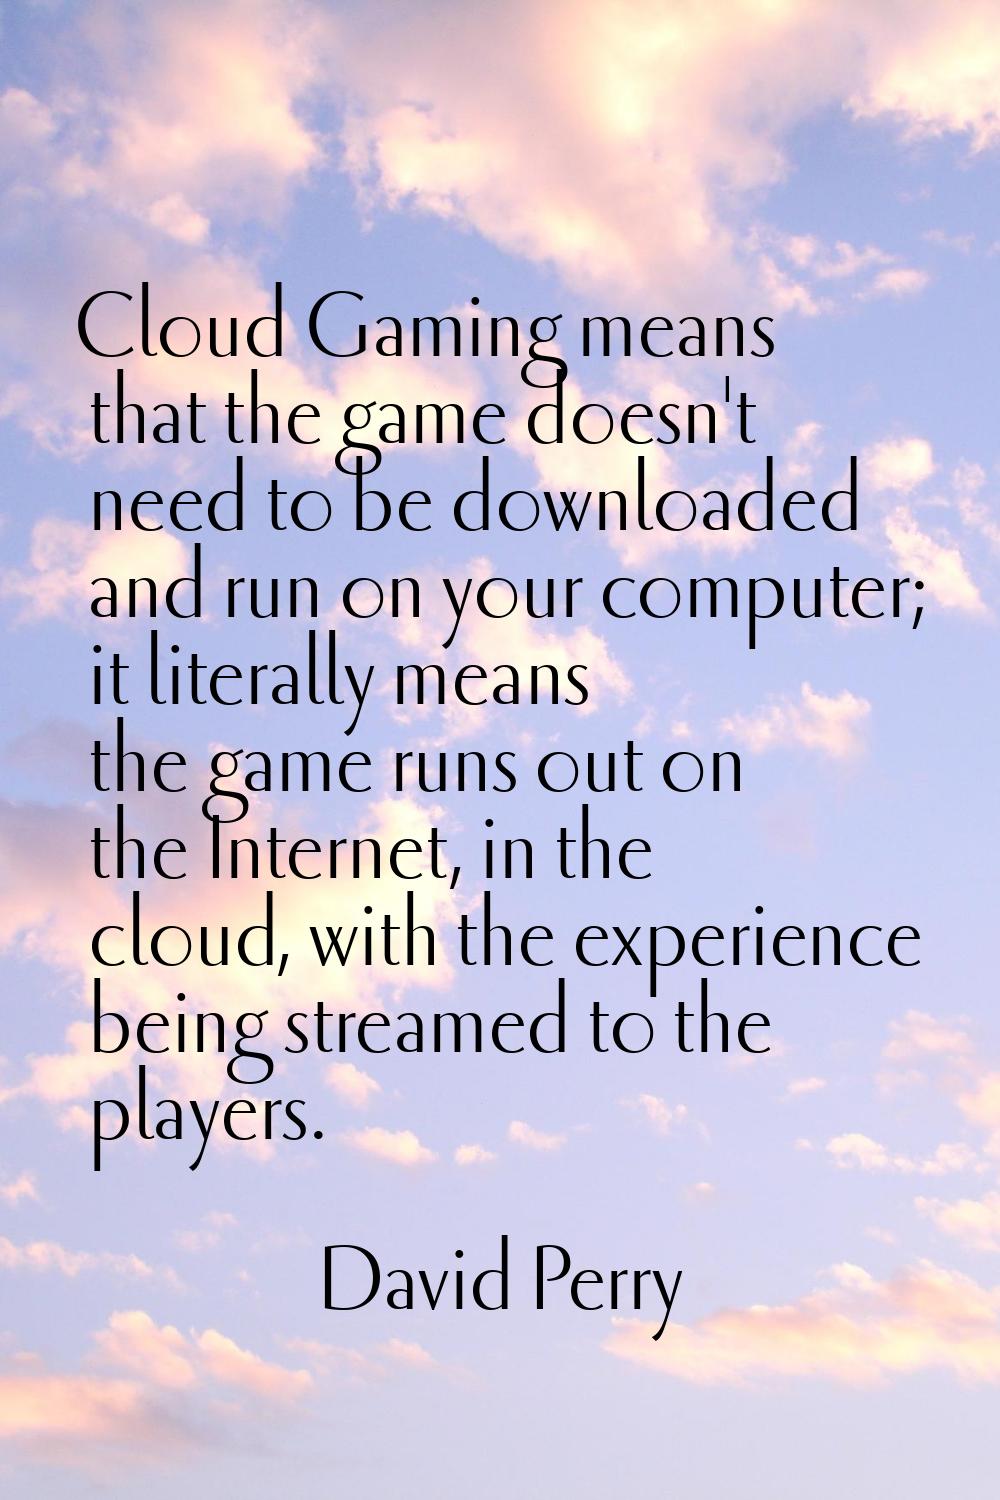 Cloud Gaming means that the game doesn't need to be downloaded and run on your computer; it literal